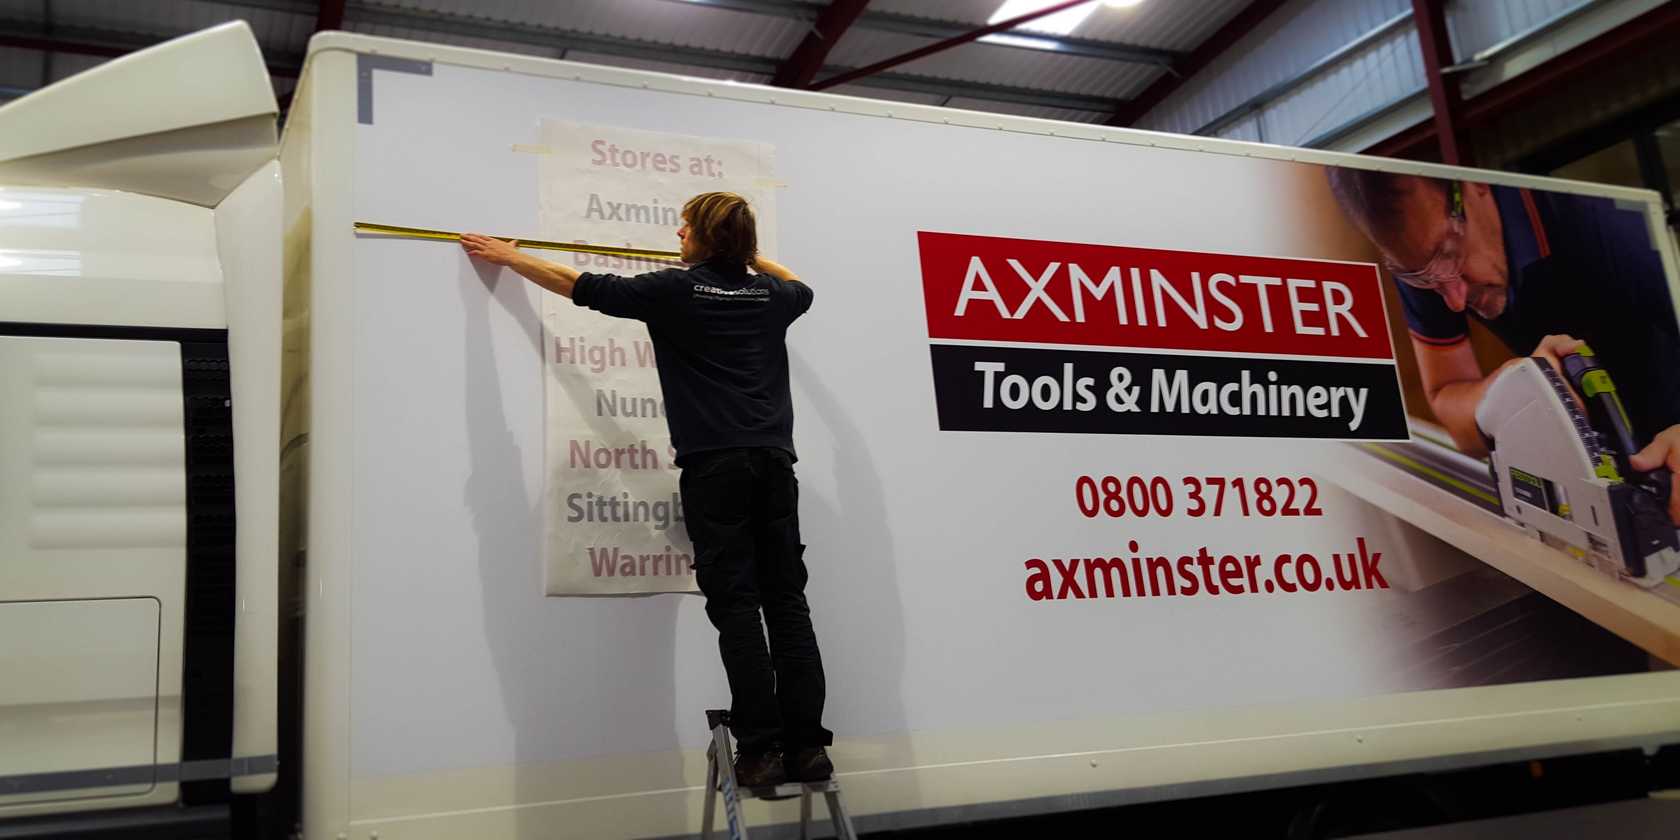 Lorry Graphics being applied by Creative Solutions for Axminster Tools